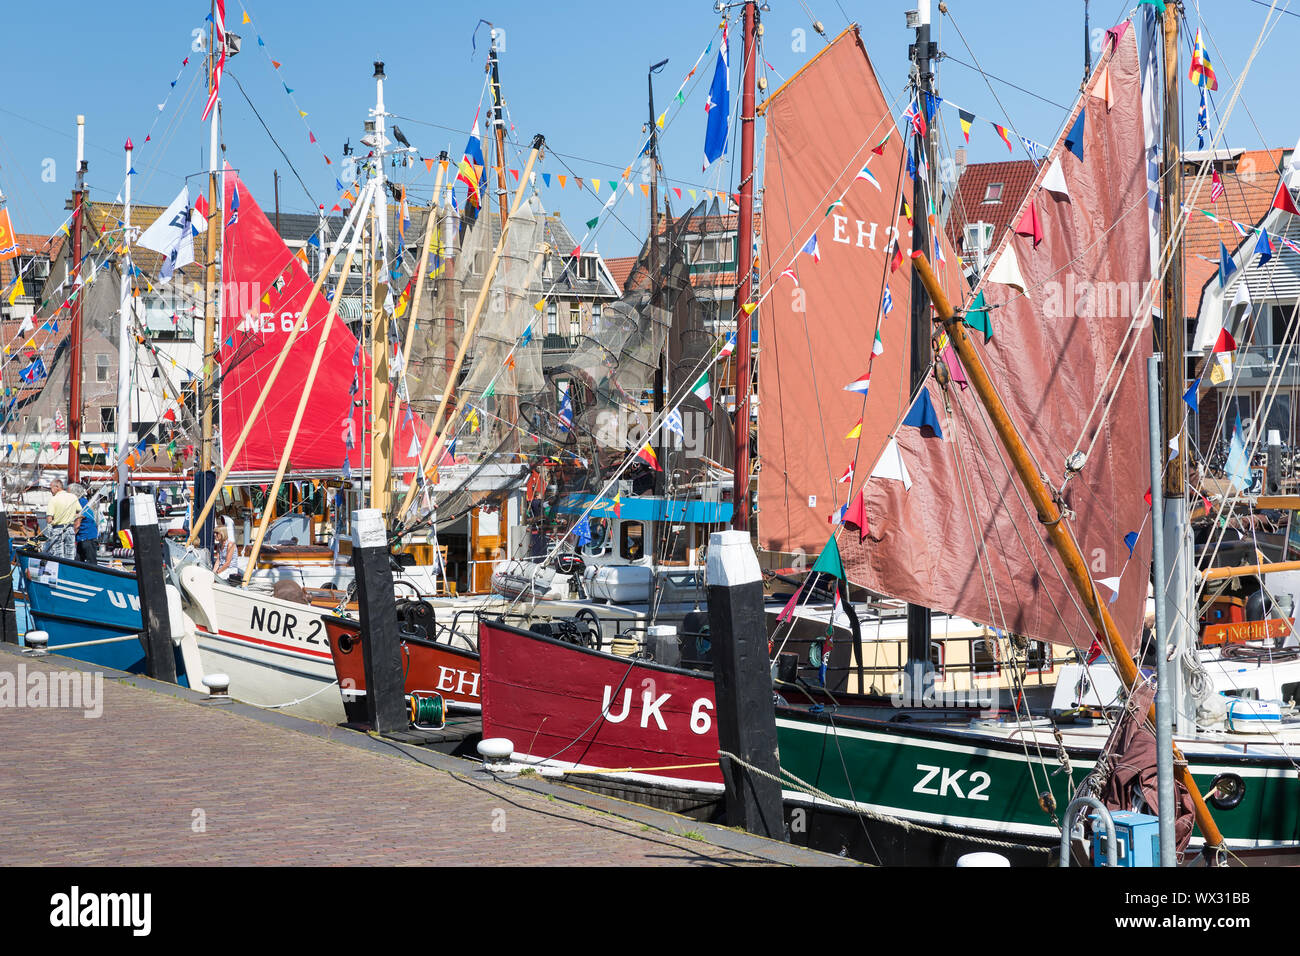 Decorated traditional fishing ships in the harbor of Urk, the Netherlands Stock Photo